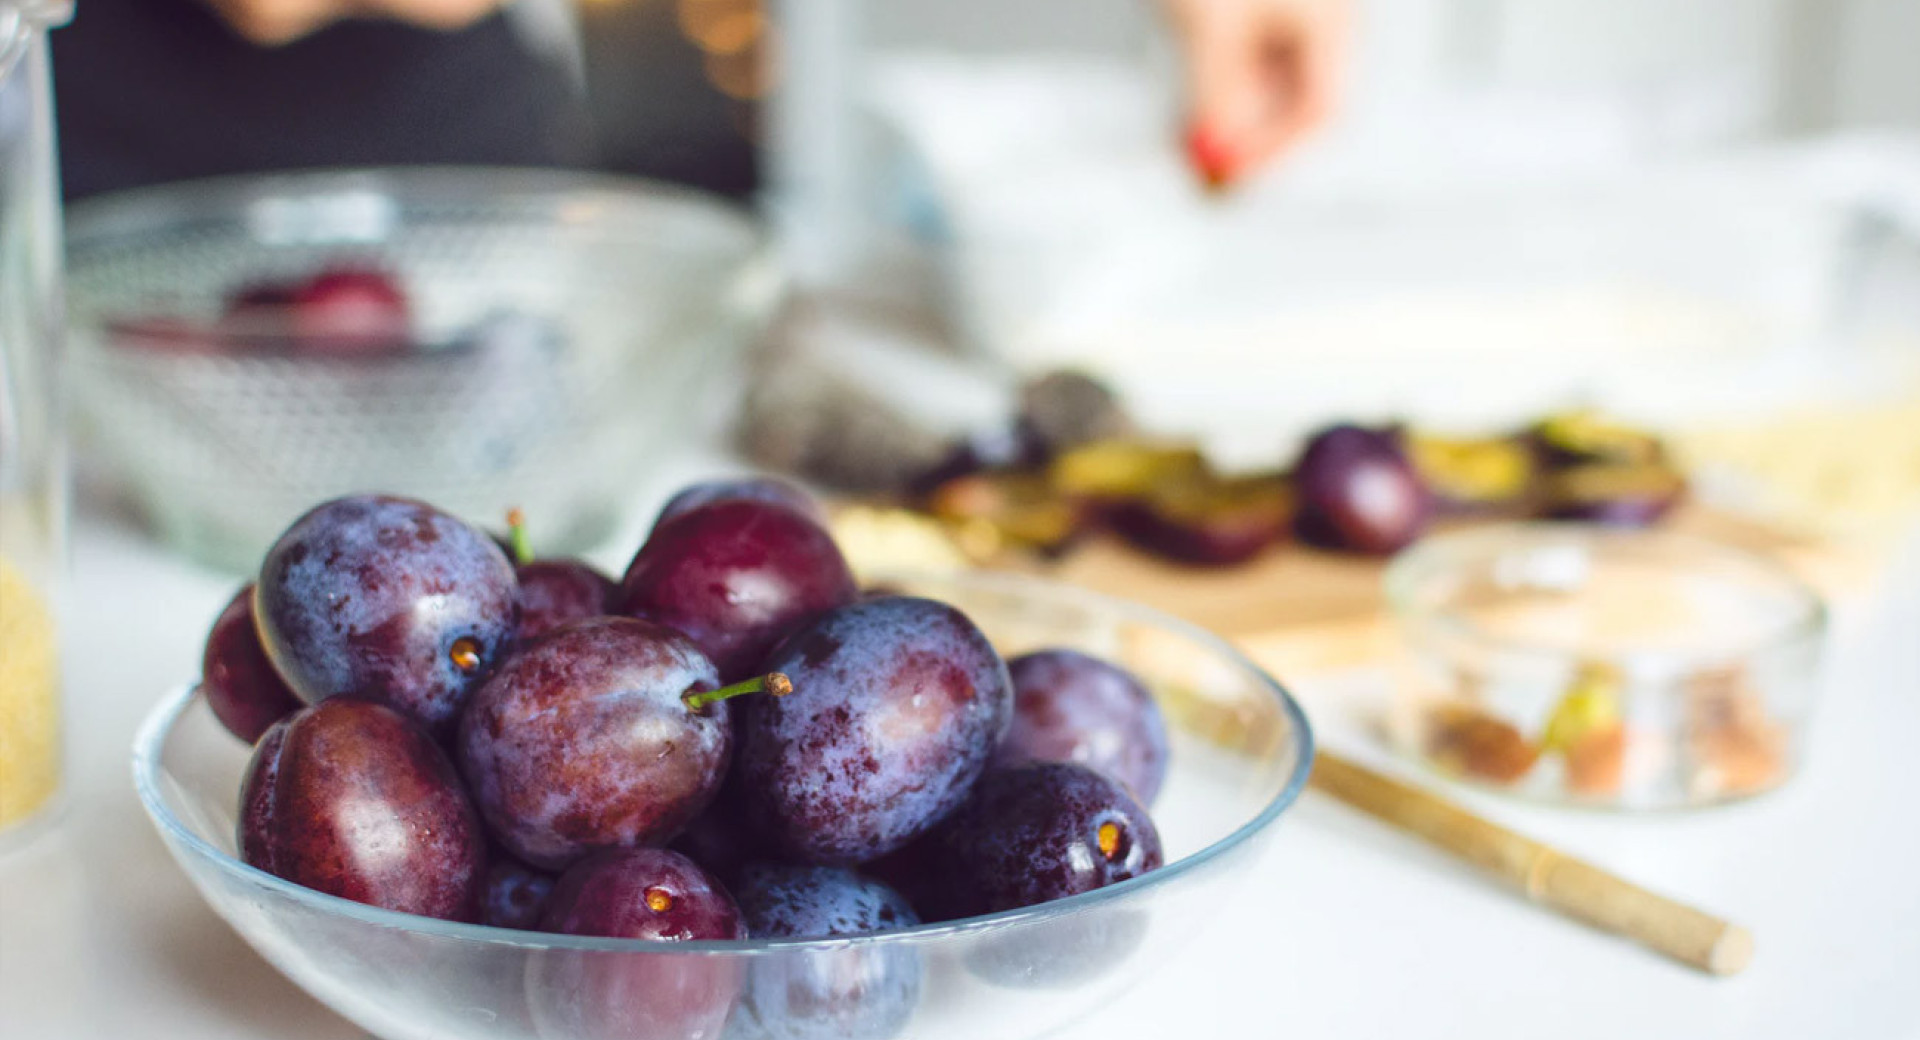 A glass bowl full of plums. In the background, out of focus, is the chef's working surface, with sliced plums on a cutting board.